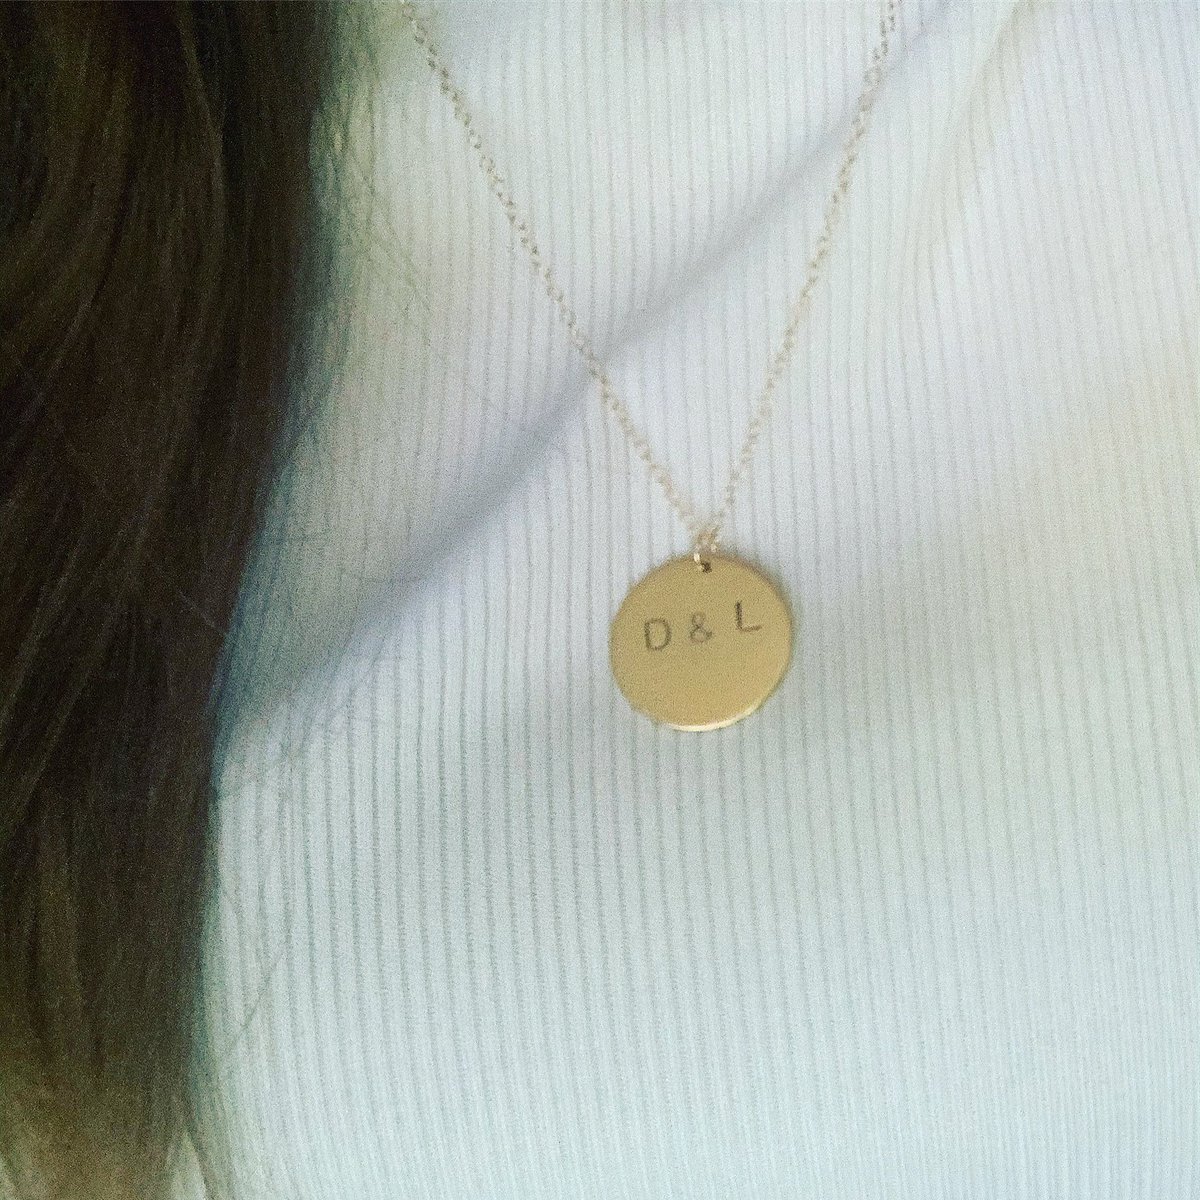 Personalised necklace with three characters of your choice #jewellery #jewelry #personaliseddisc #personalisednecklace #goldpersonalisednecklace #goldnecklace #initialnecklace #golddiscnecklace #goldjewelry #jewelrydesigner #fashion #accessories